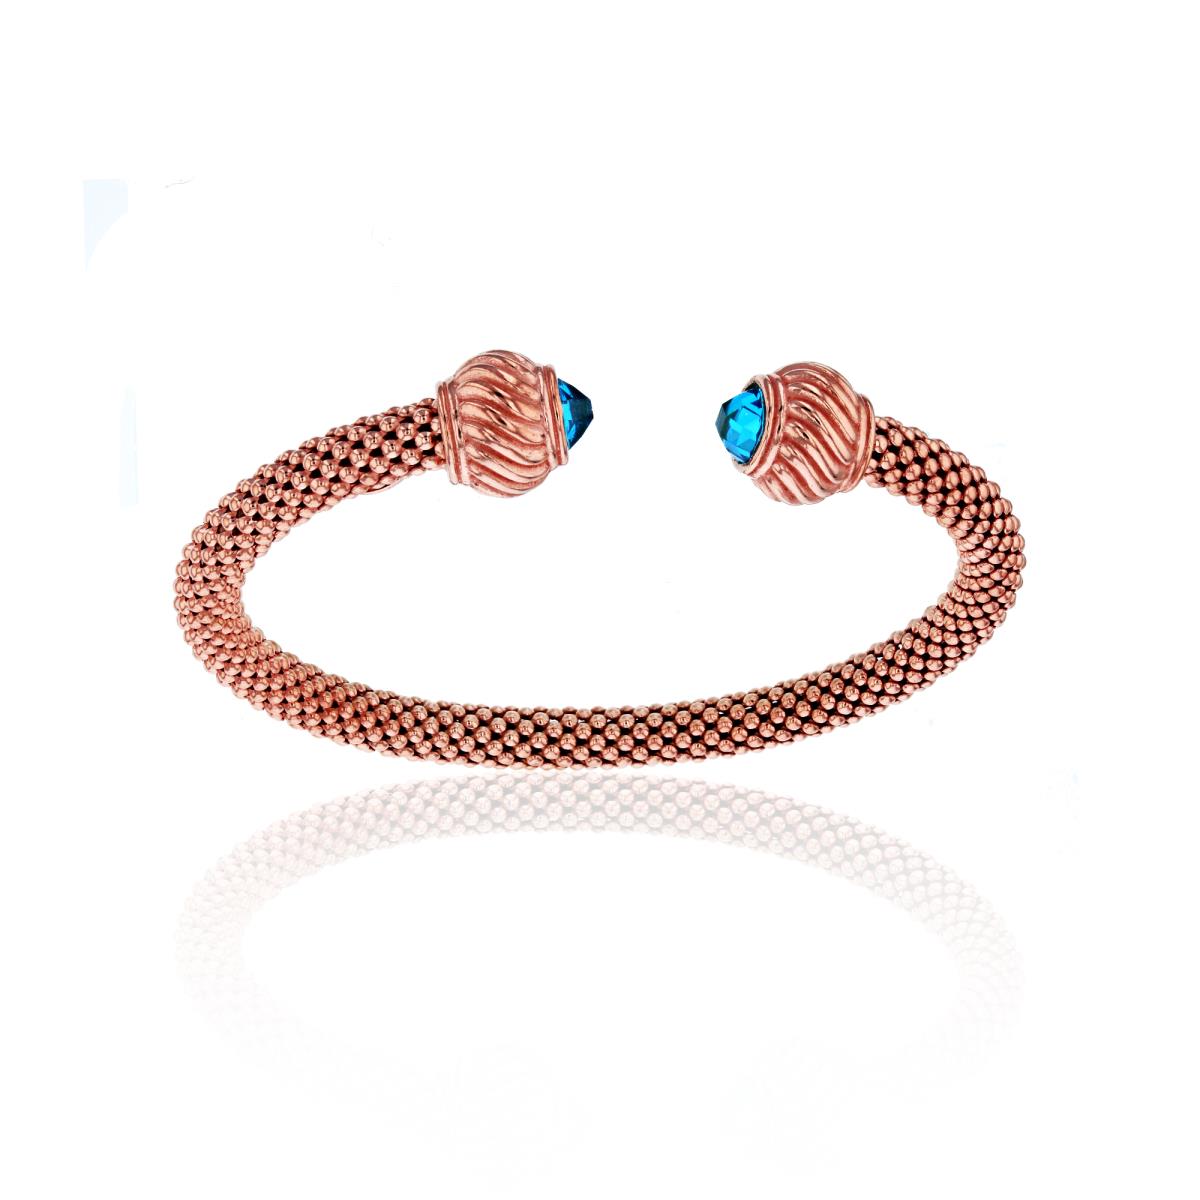 Sterling Silver Rose Gold Italian Popcorn Bangle with Color Stones at the ends